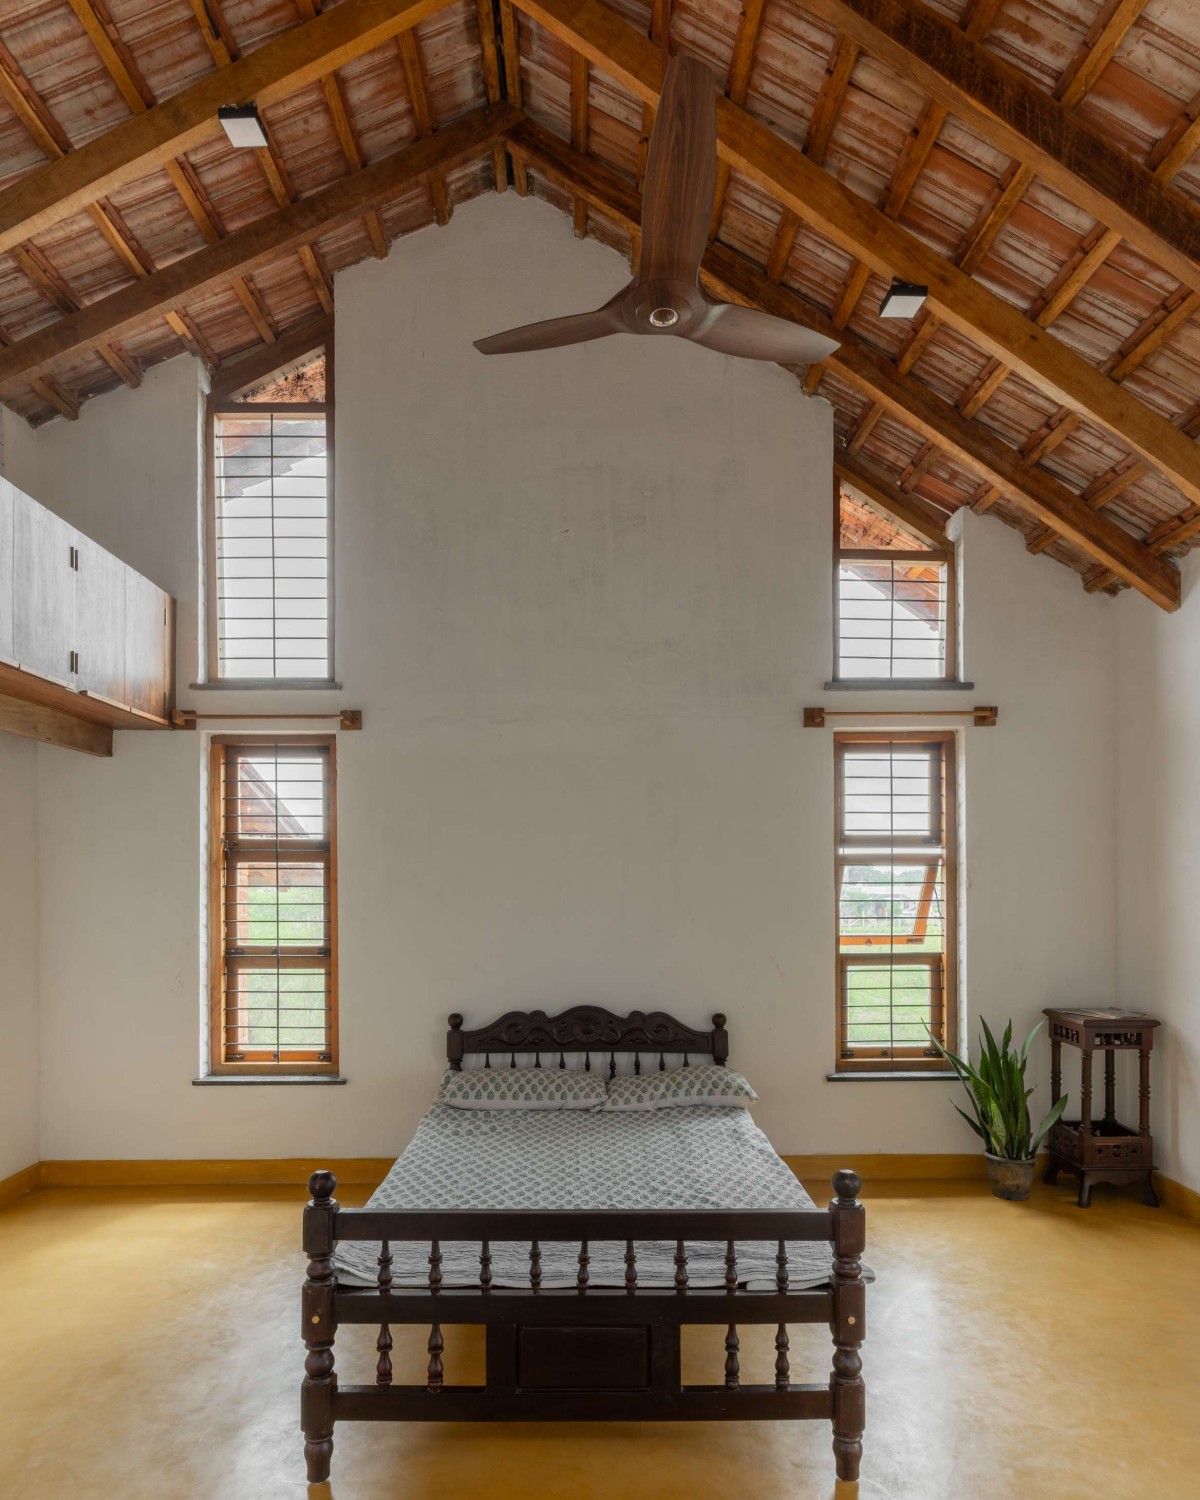 Bedroom 2 of Brick Manor by Bhutha Earthen Architecture Studio